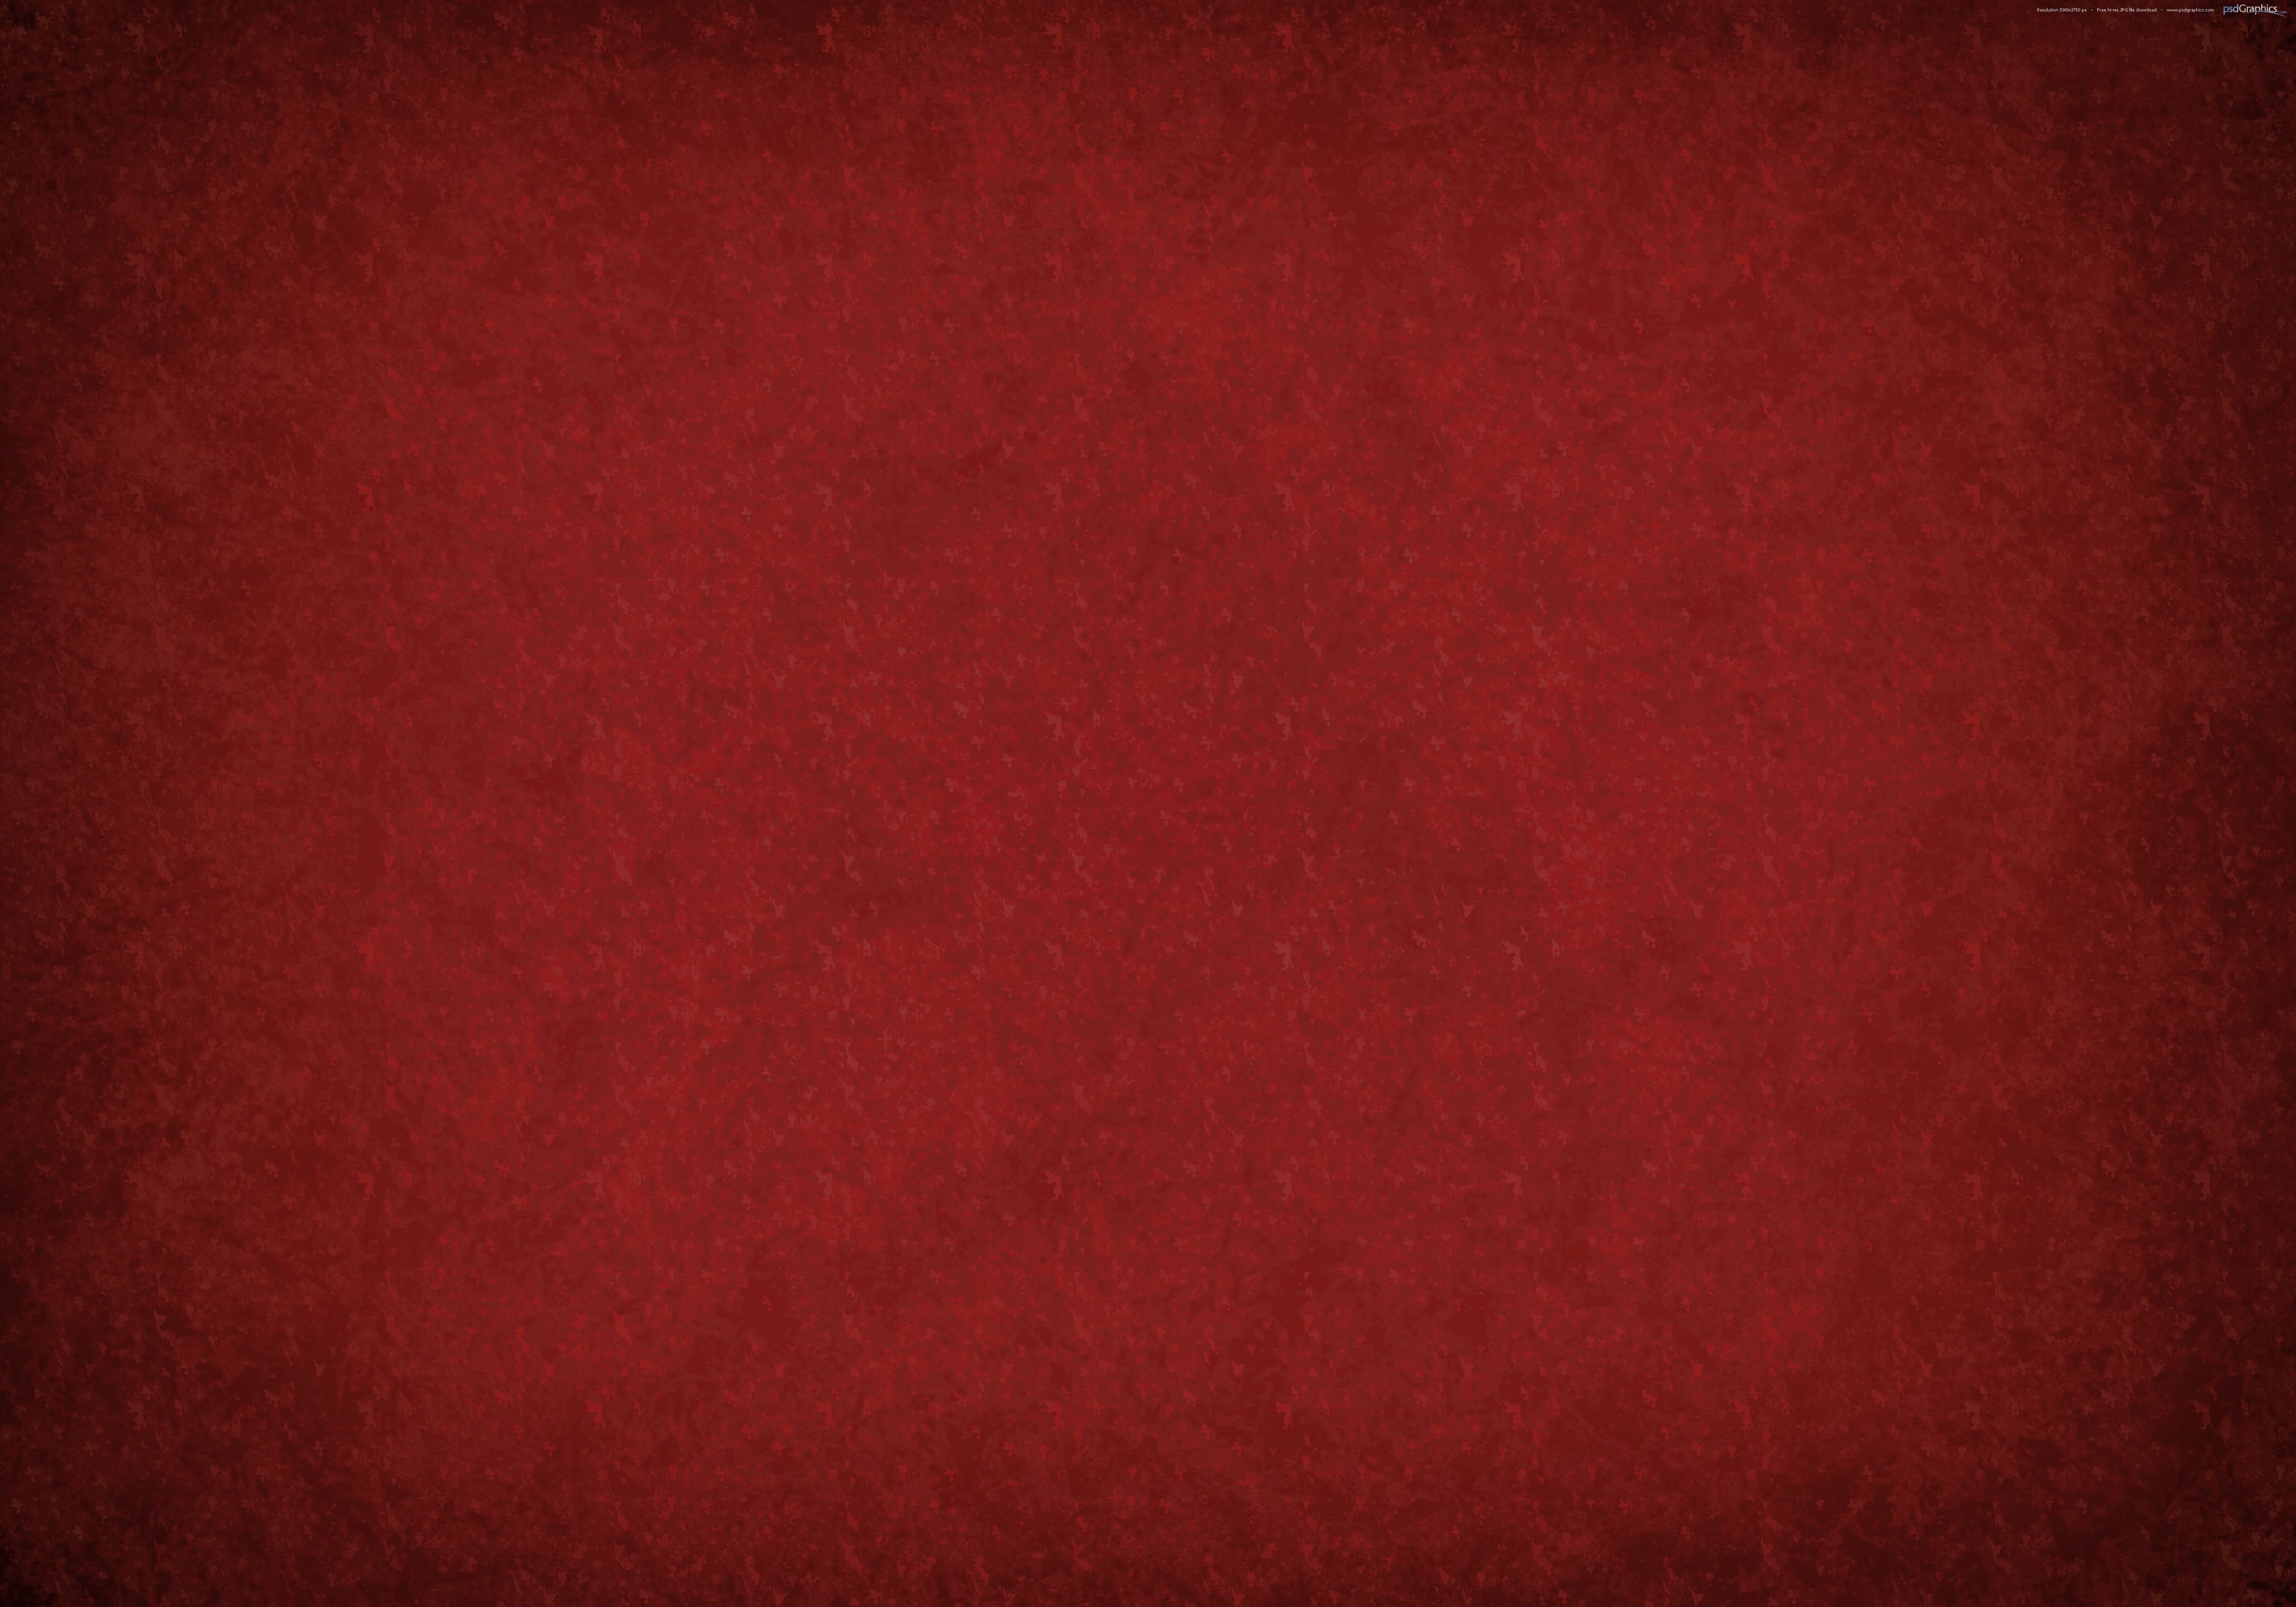 Red and brown grunge backgrounds | PSDGraphics